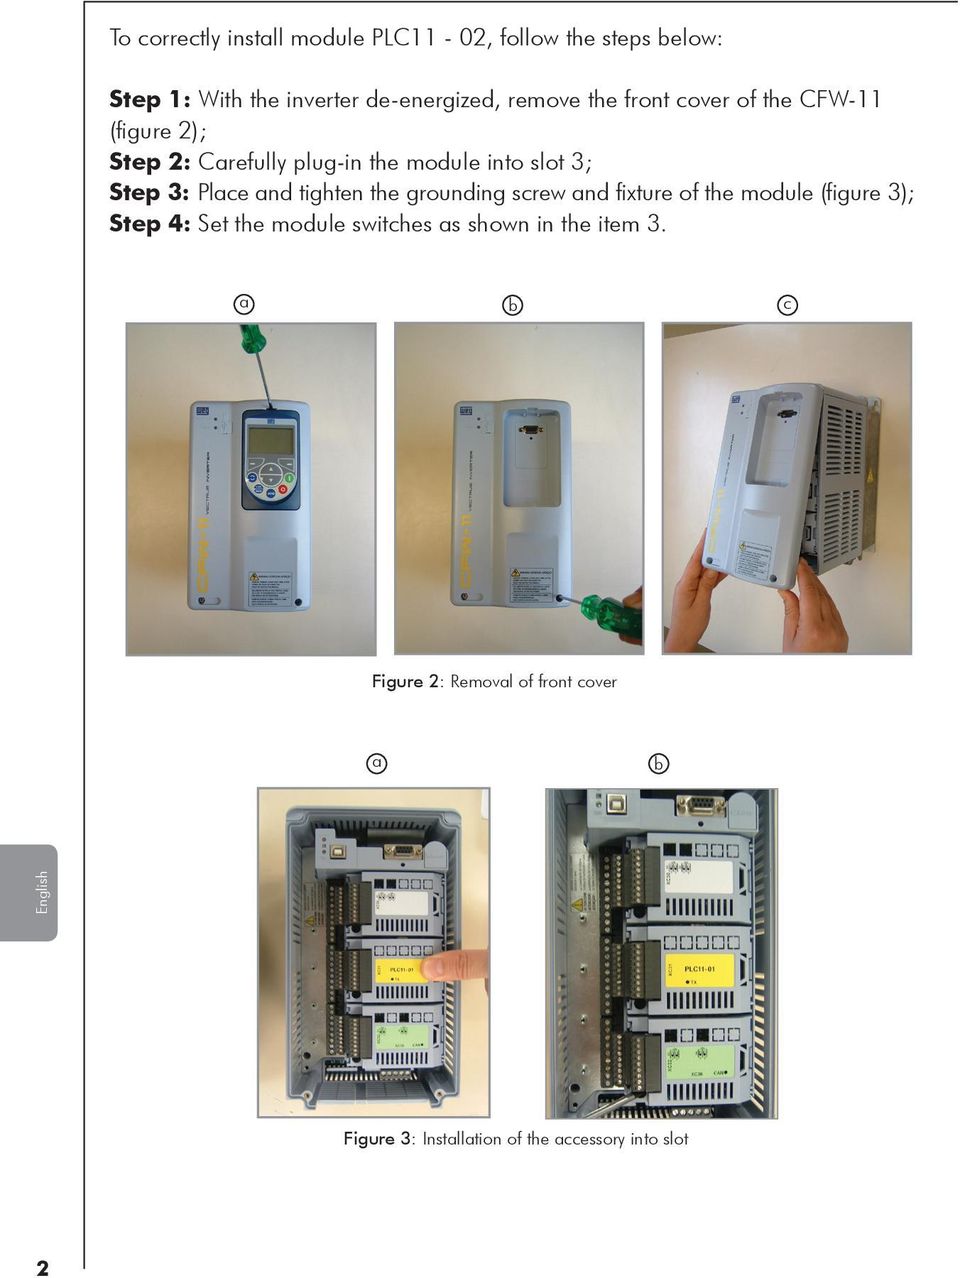 tighten the grounding screw and fixture of the module (figure 3); Step 4: Set the module switches as shown in